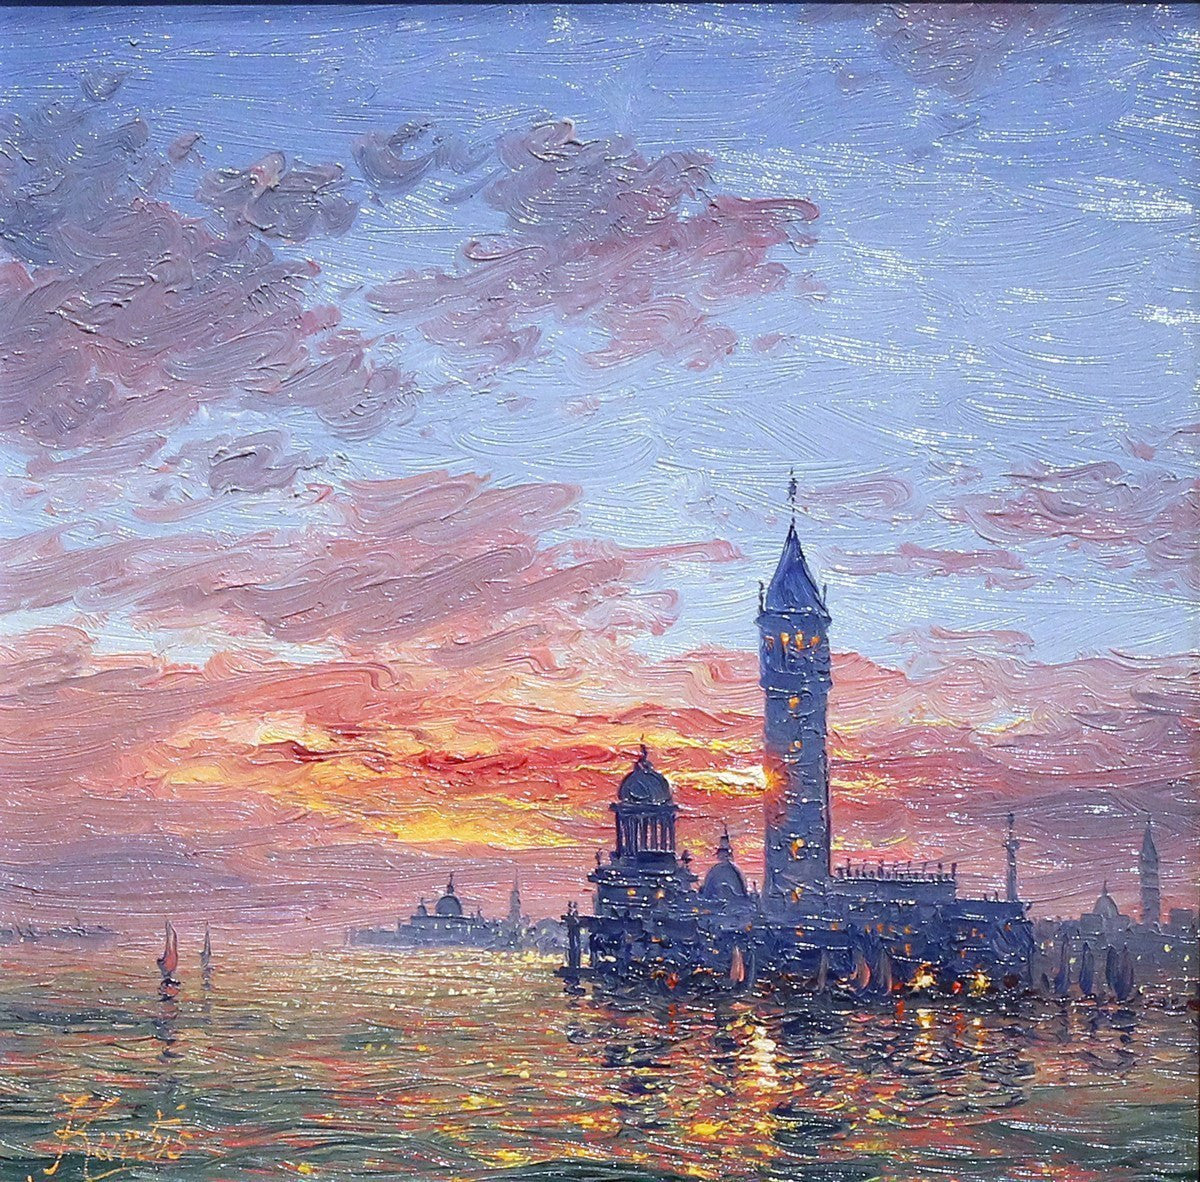 Reflections of Venice - SOLD Andrew Grant Kurtis